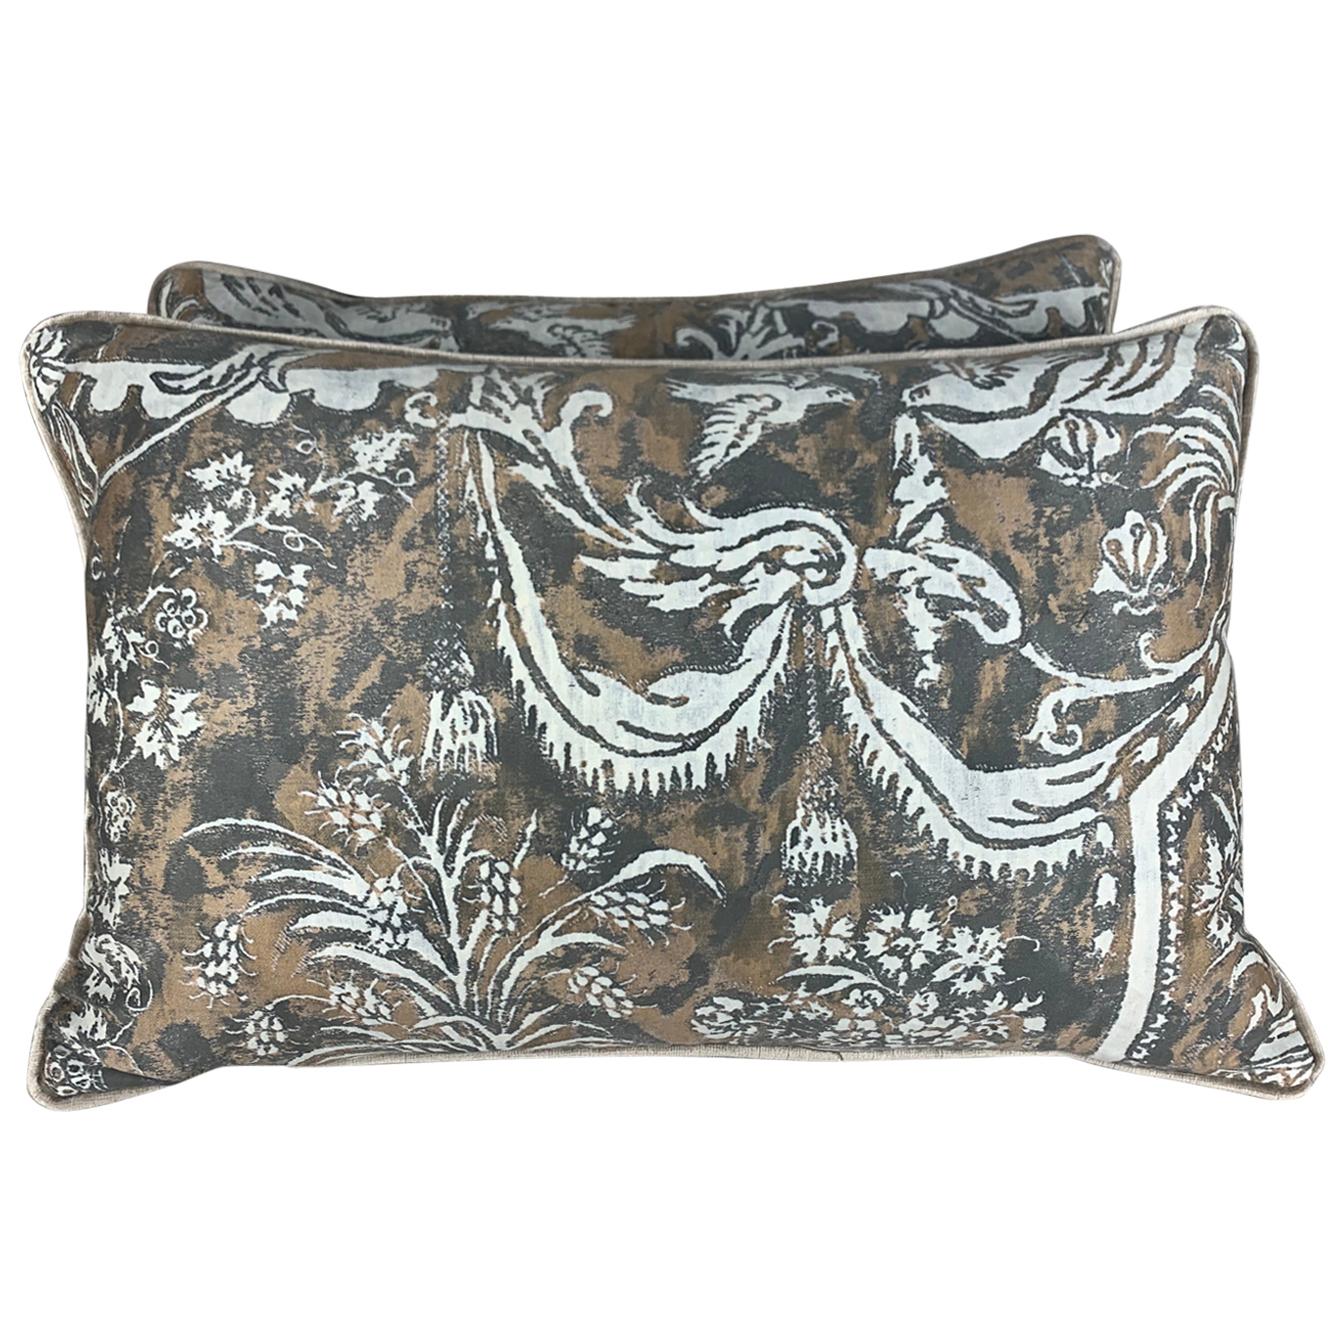 Pair of Unique Authentic Fortuny Pillows